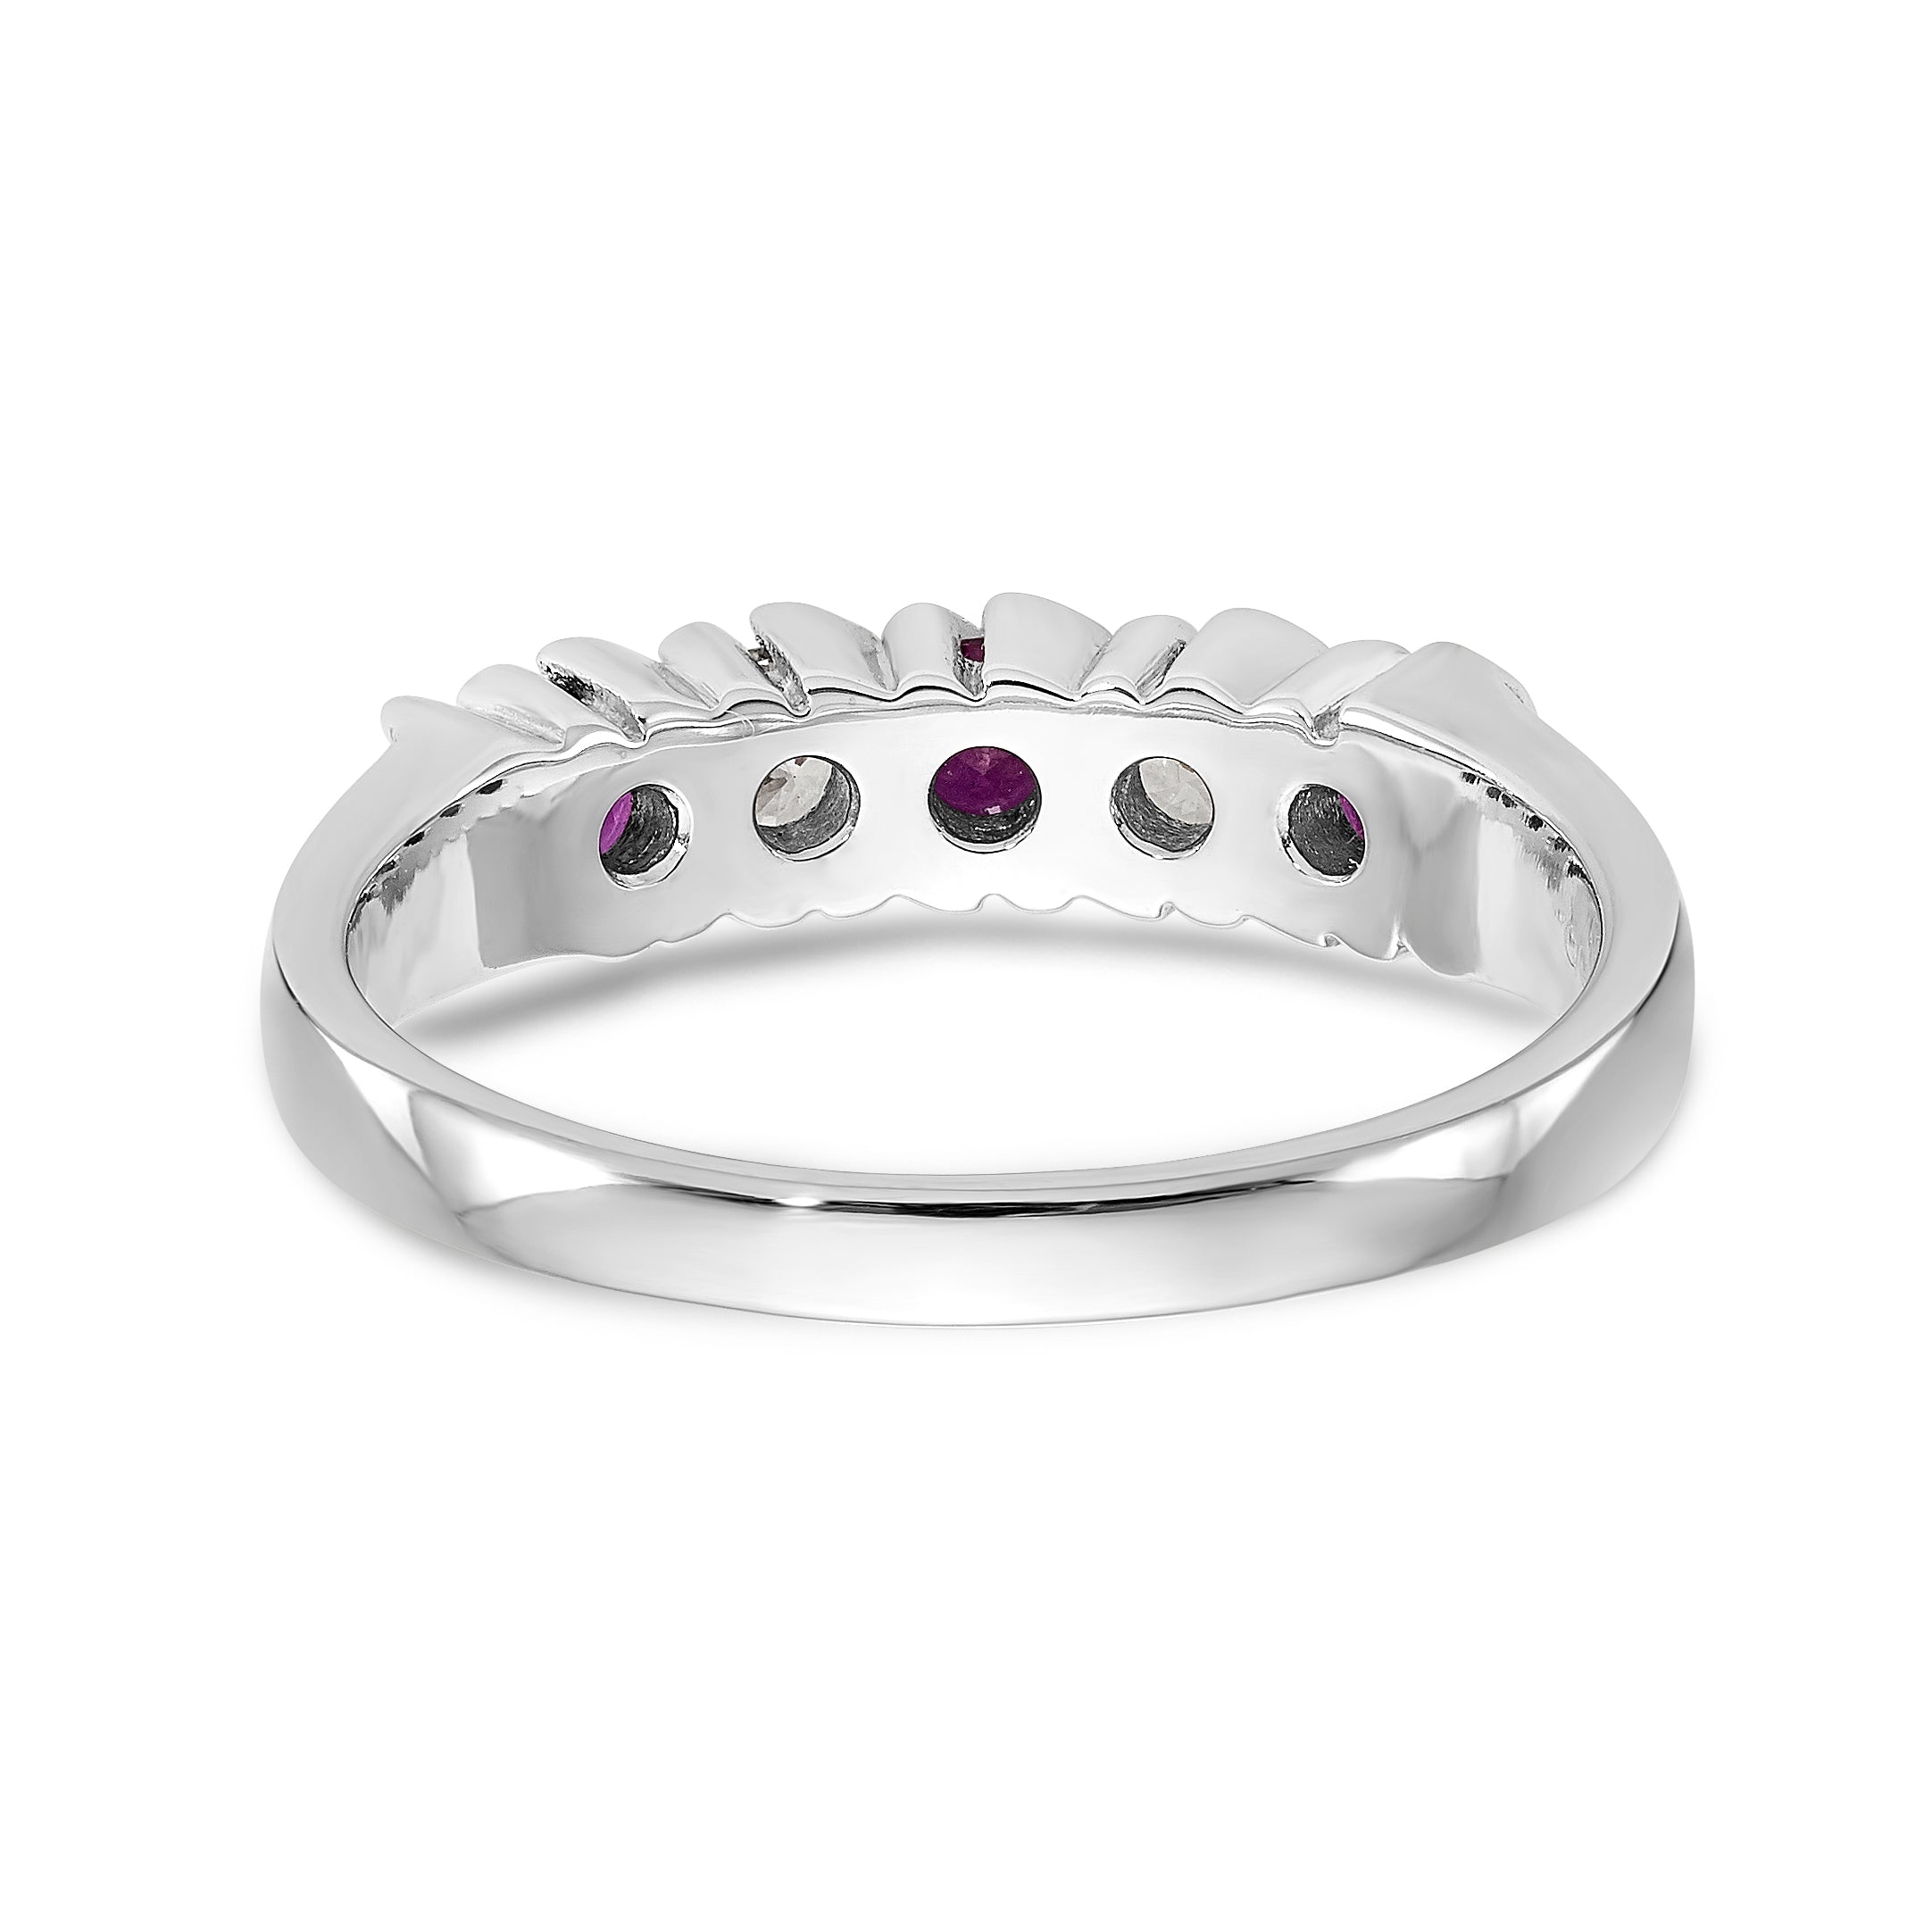 14K White Gold 1/5 carat Diamond and Ruby Complete Band